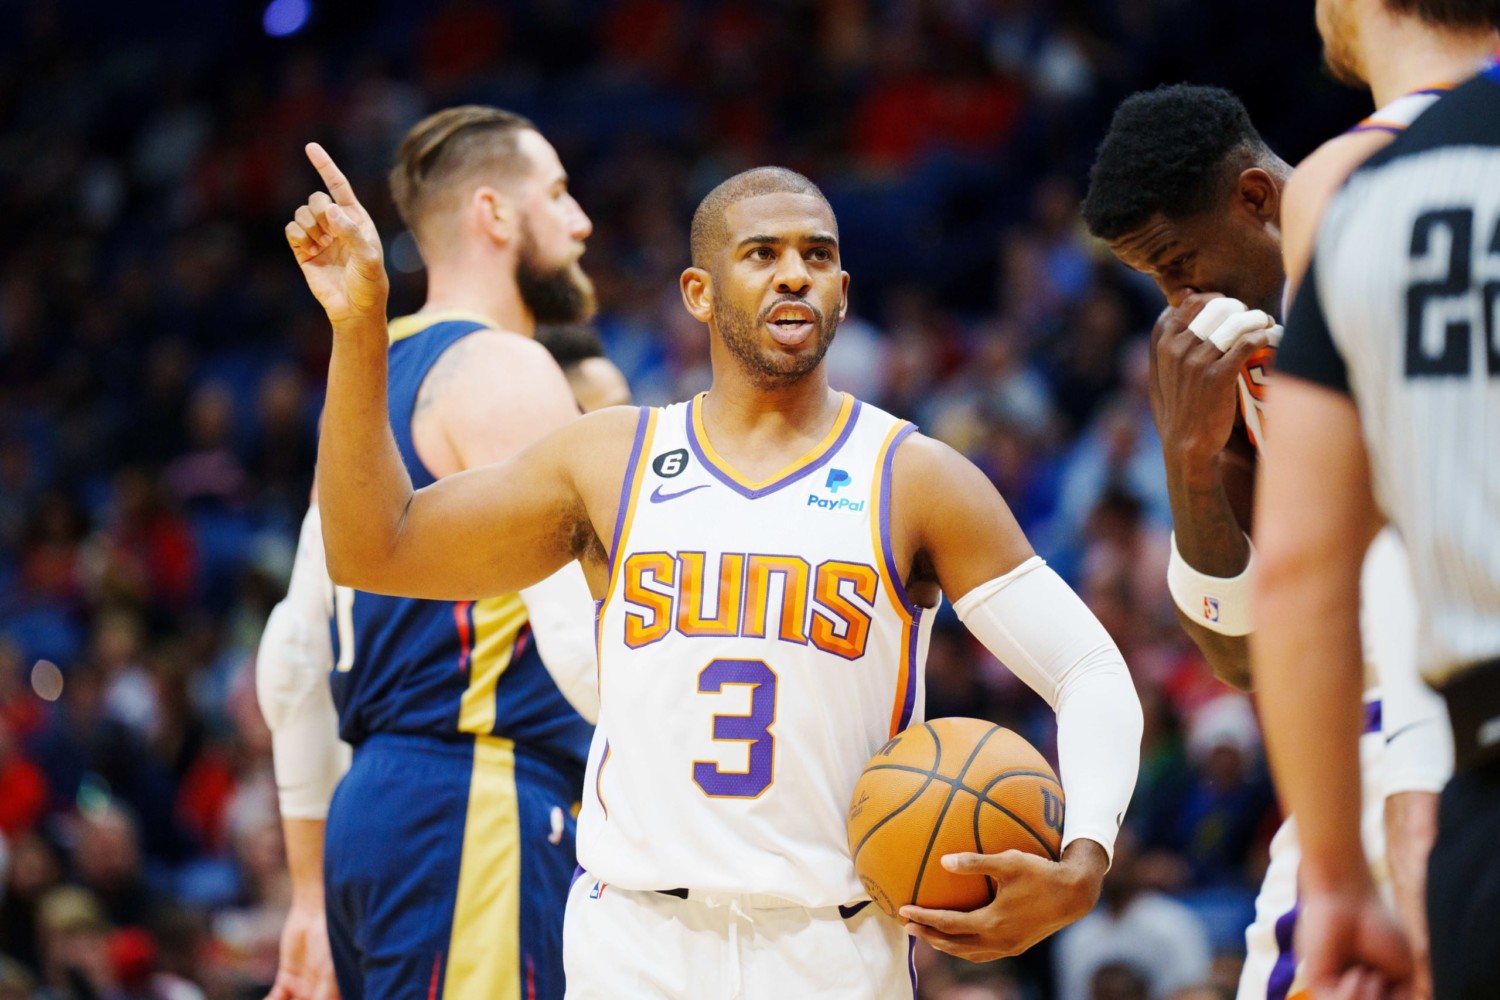 For Chris Paul, Studying at an H.B.C.U. Was a 'Natural' Fit - The